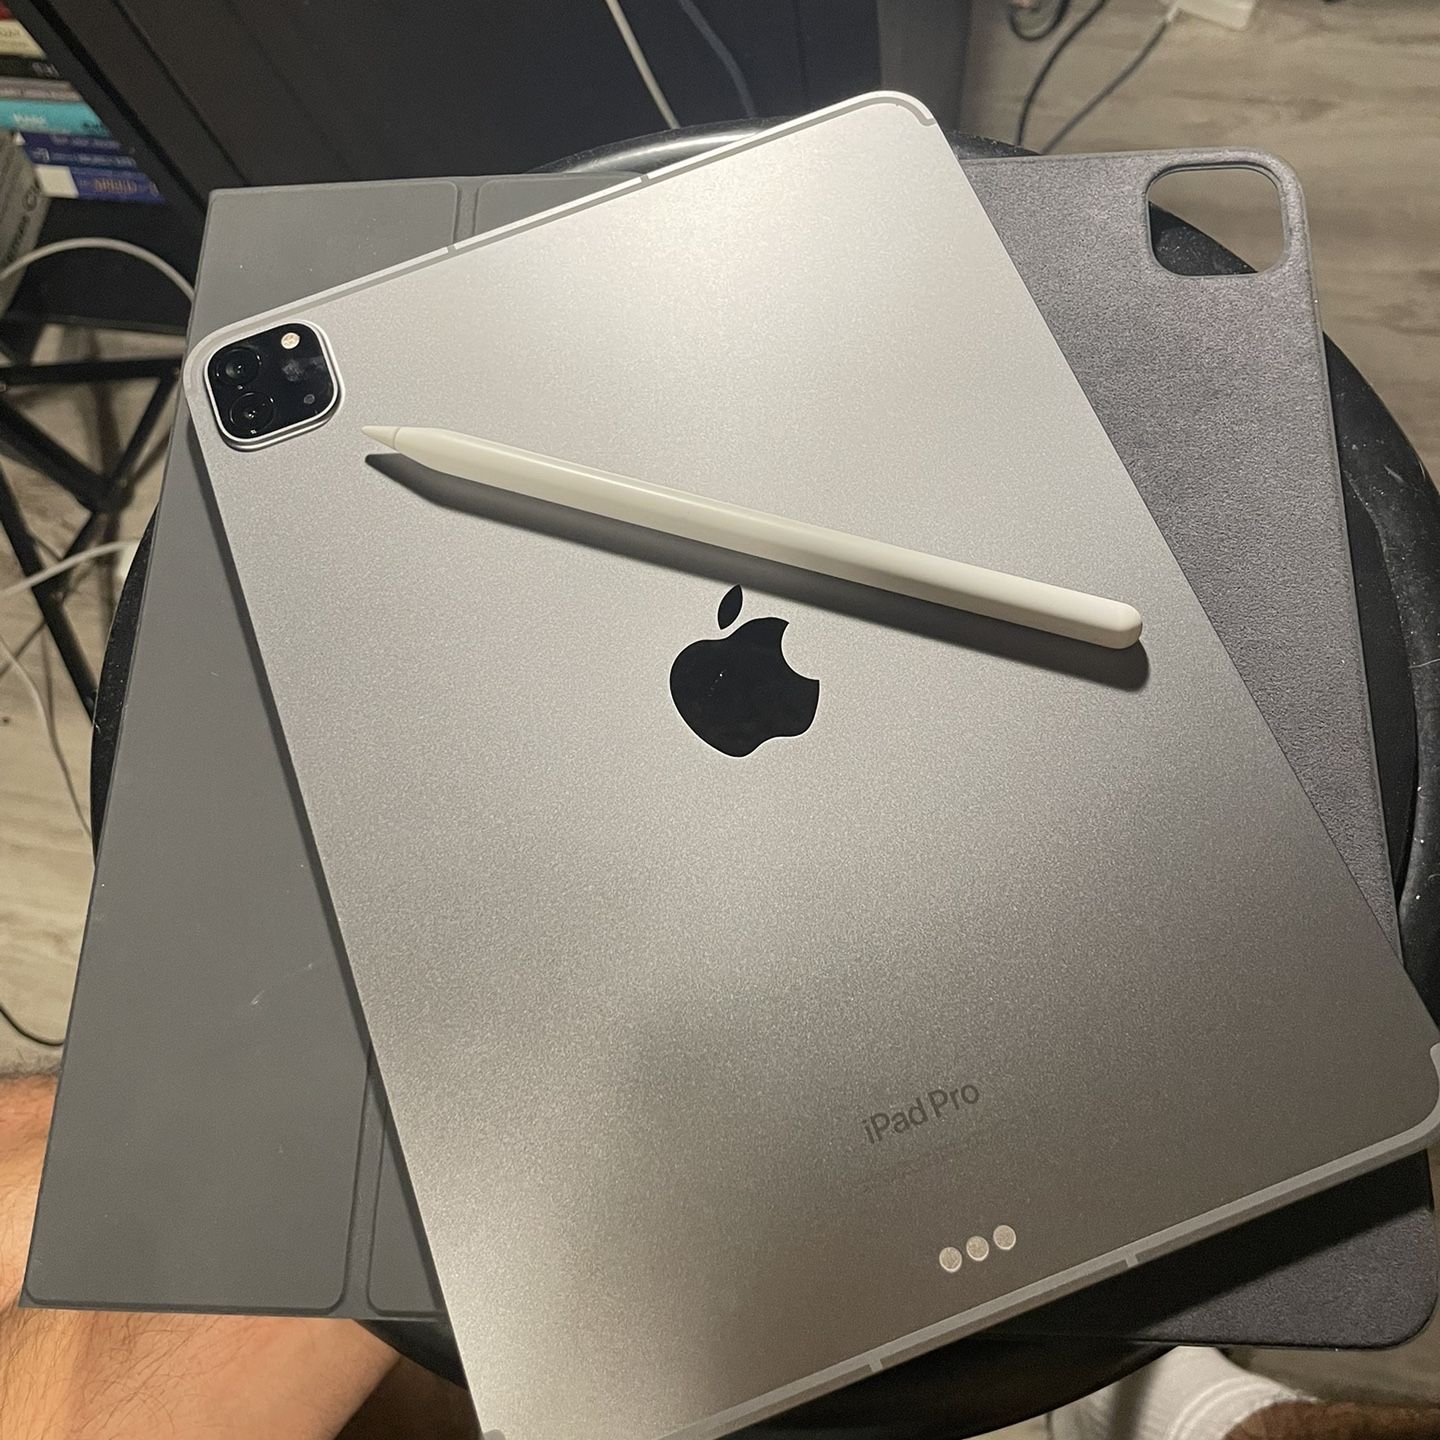 11 inch iPad Pro 512 GB Wi-Fi + Cellular With AppleCare+, Apple Pencil, Smart Cover and Accessories — Will Negotiate 